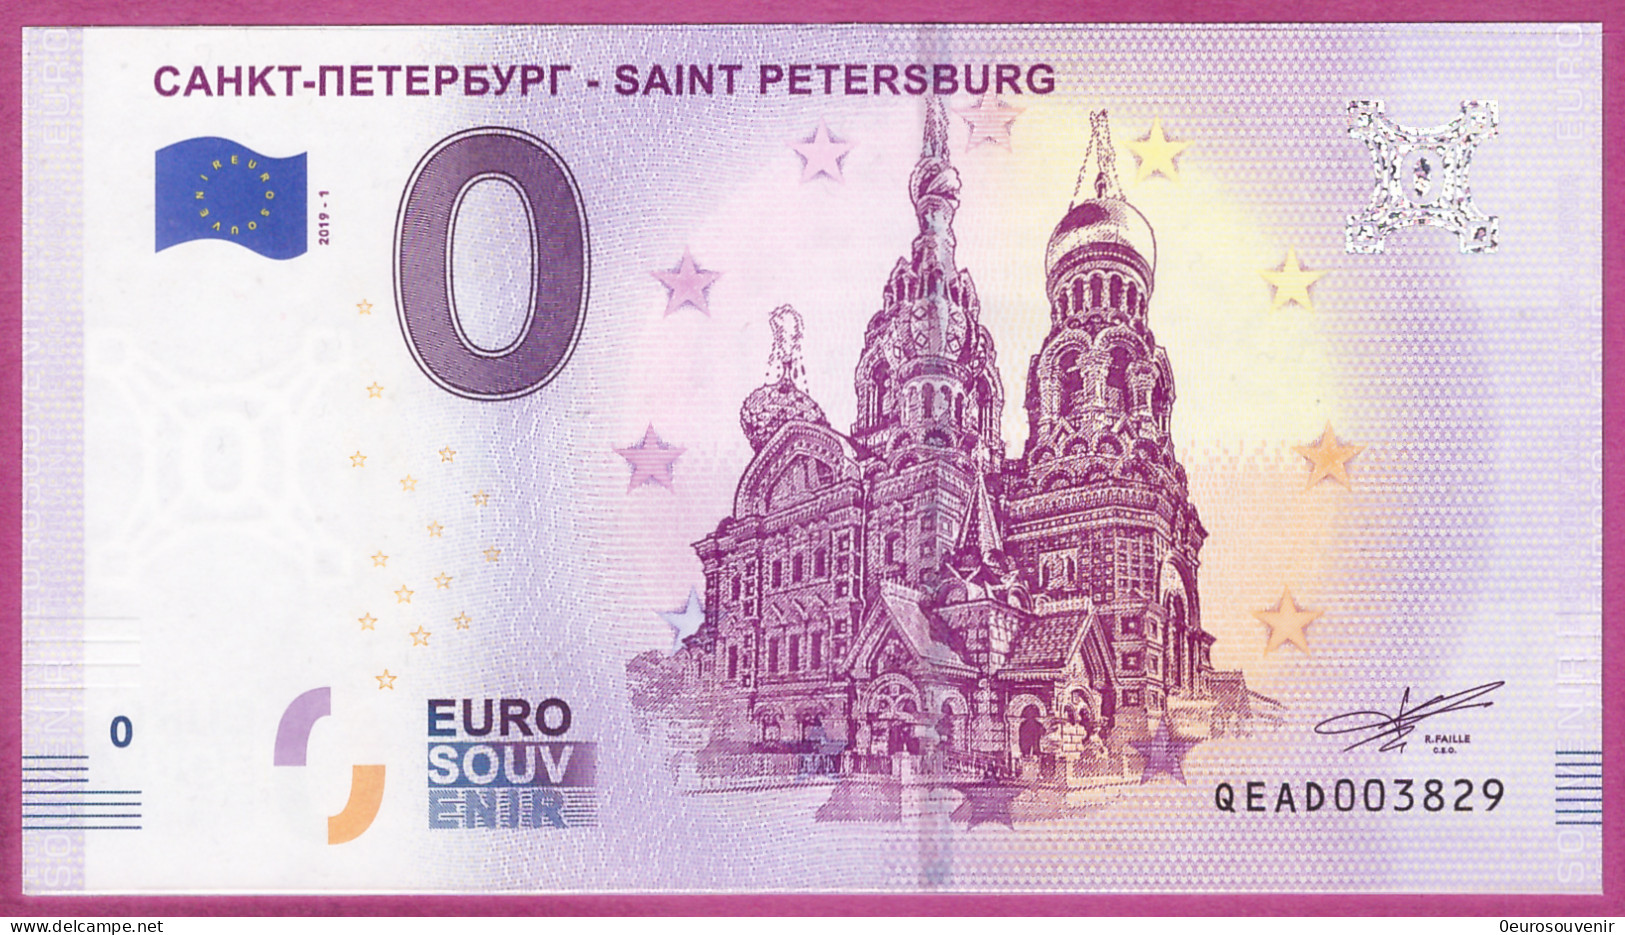 0-Euro QEAD 2019-1 CAHKT-ПETEPБУРГ - SAINT PETERSBURG - Private Proofs / Unofficial